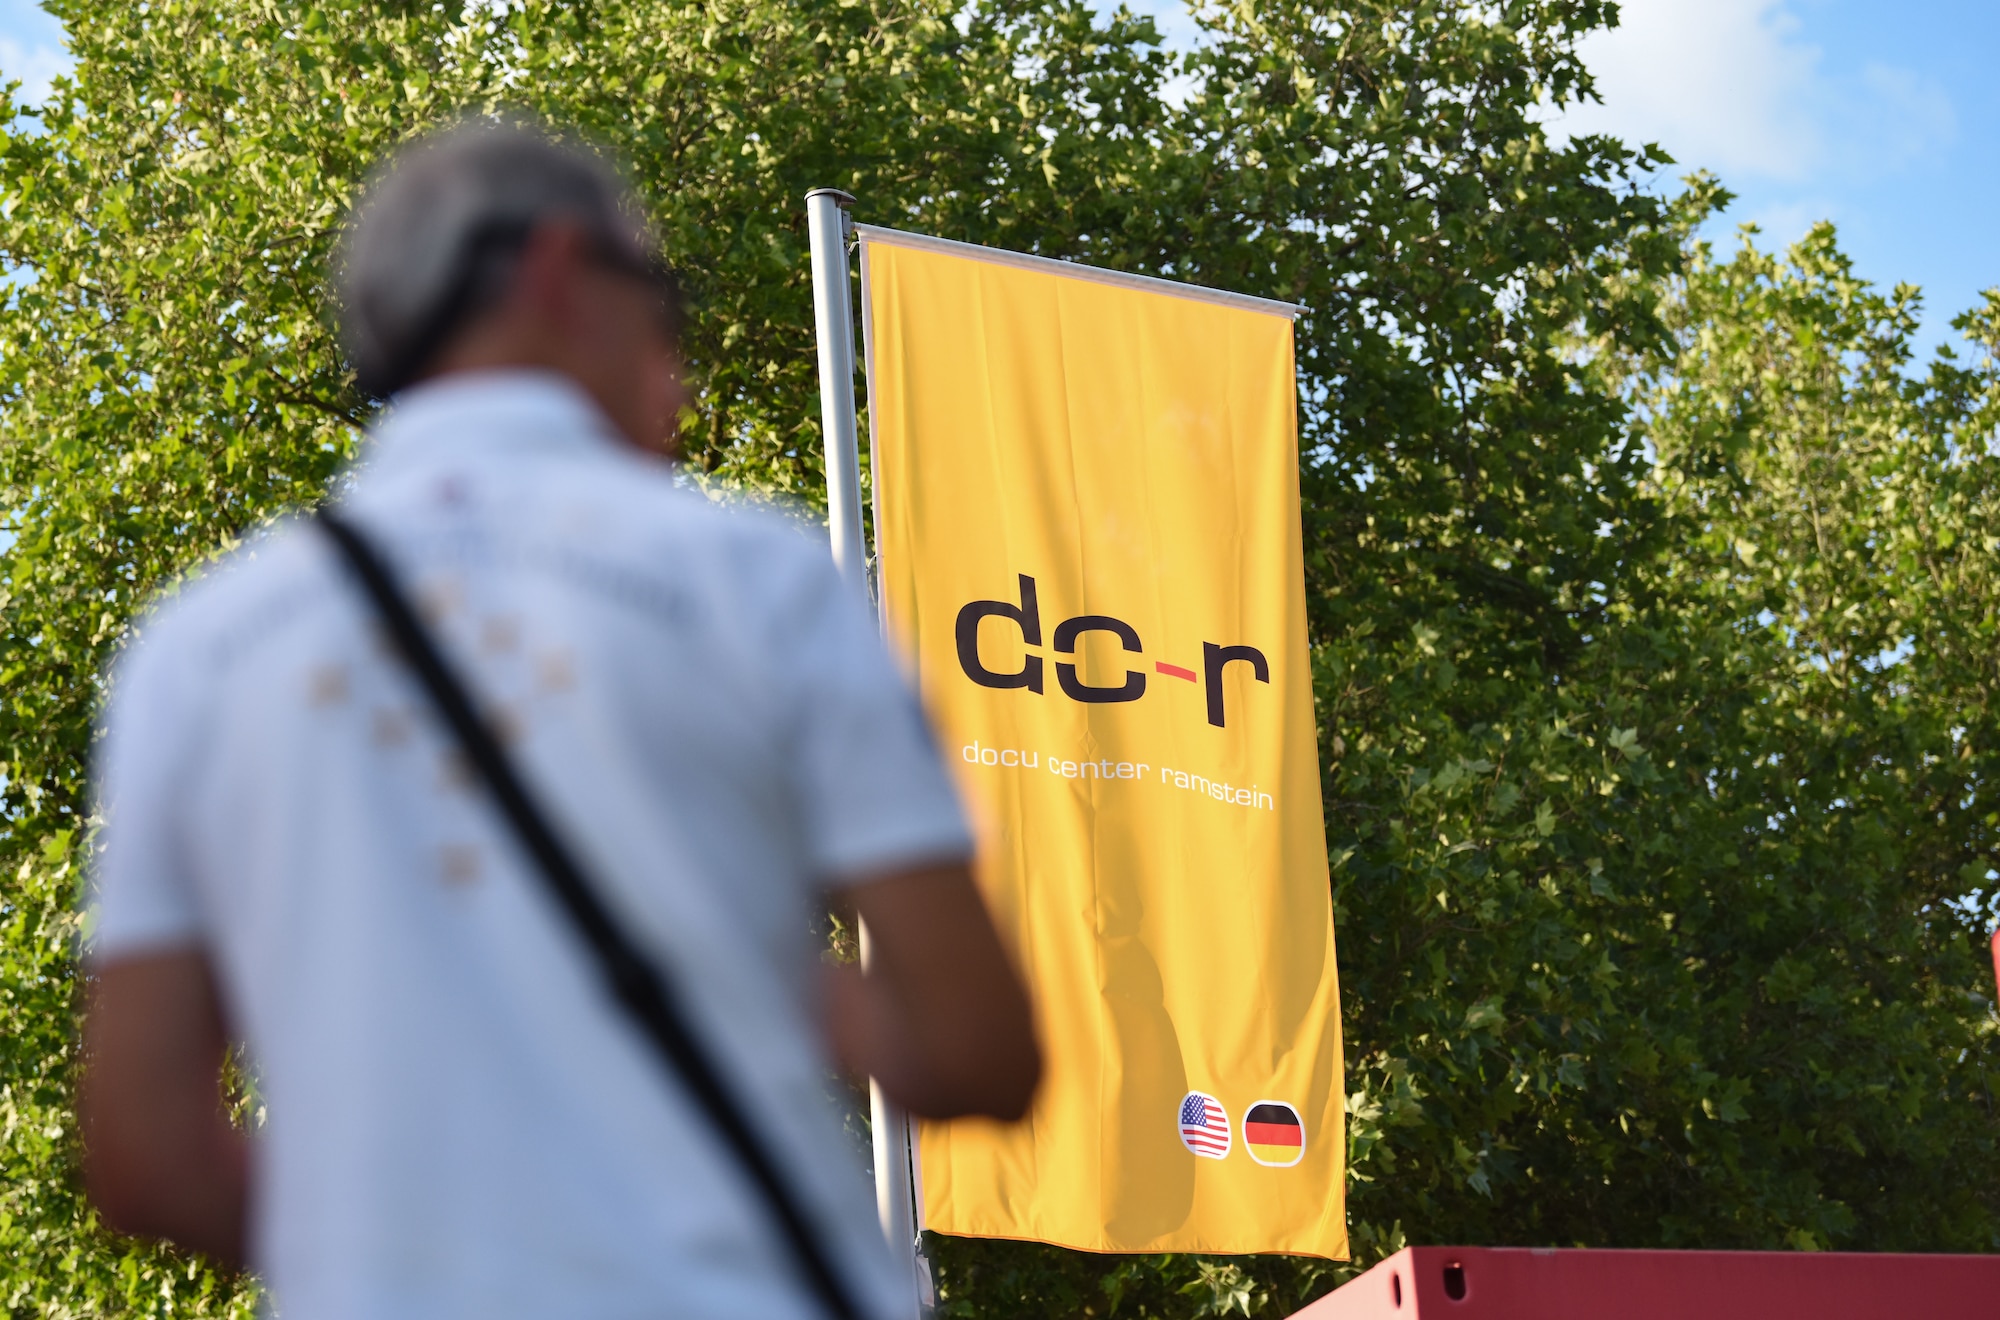 A flag depicting the Docu Center Ramstein logo is displayed at the center in Ramstein-Miesenbach, Germany, June 15, 2022.